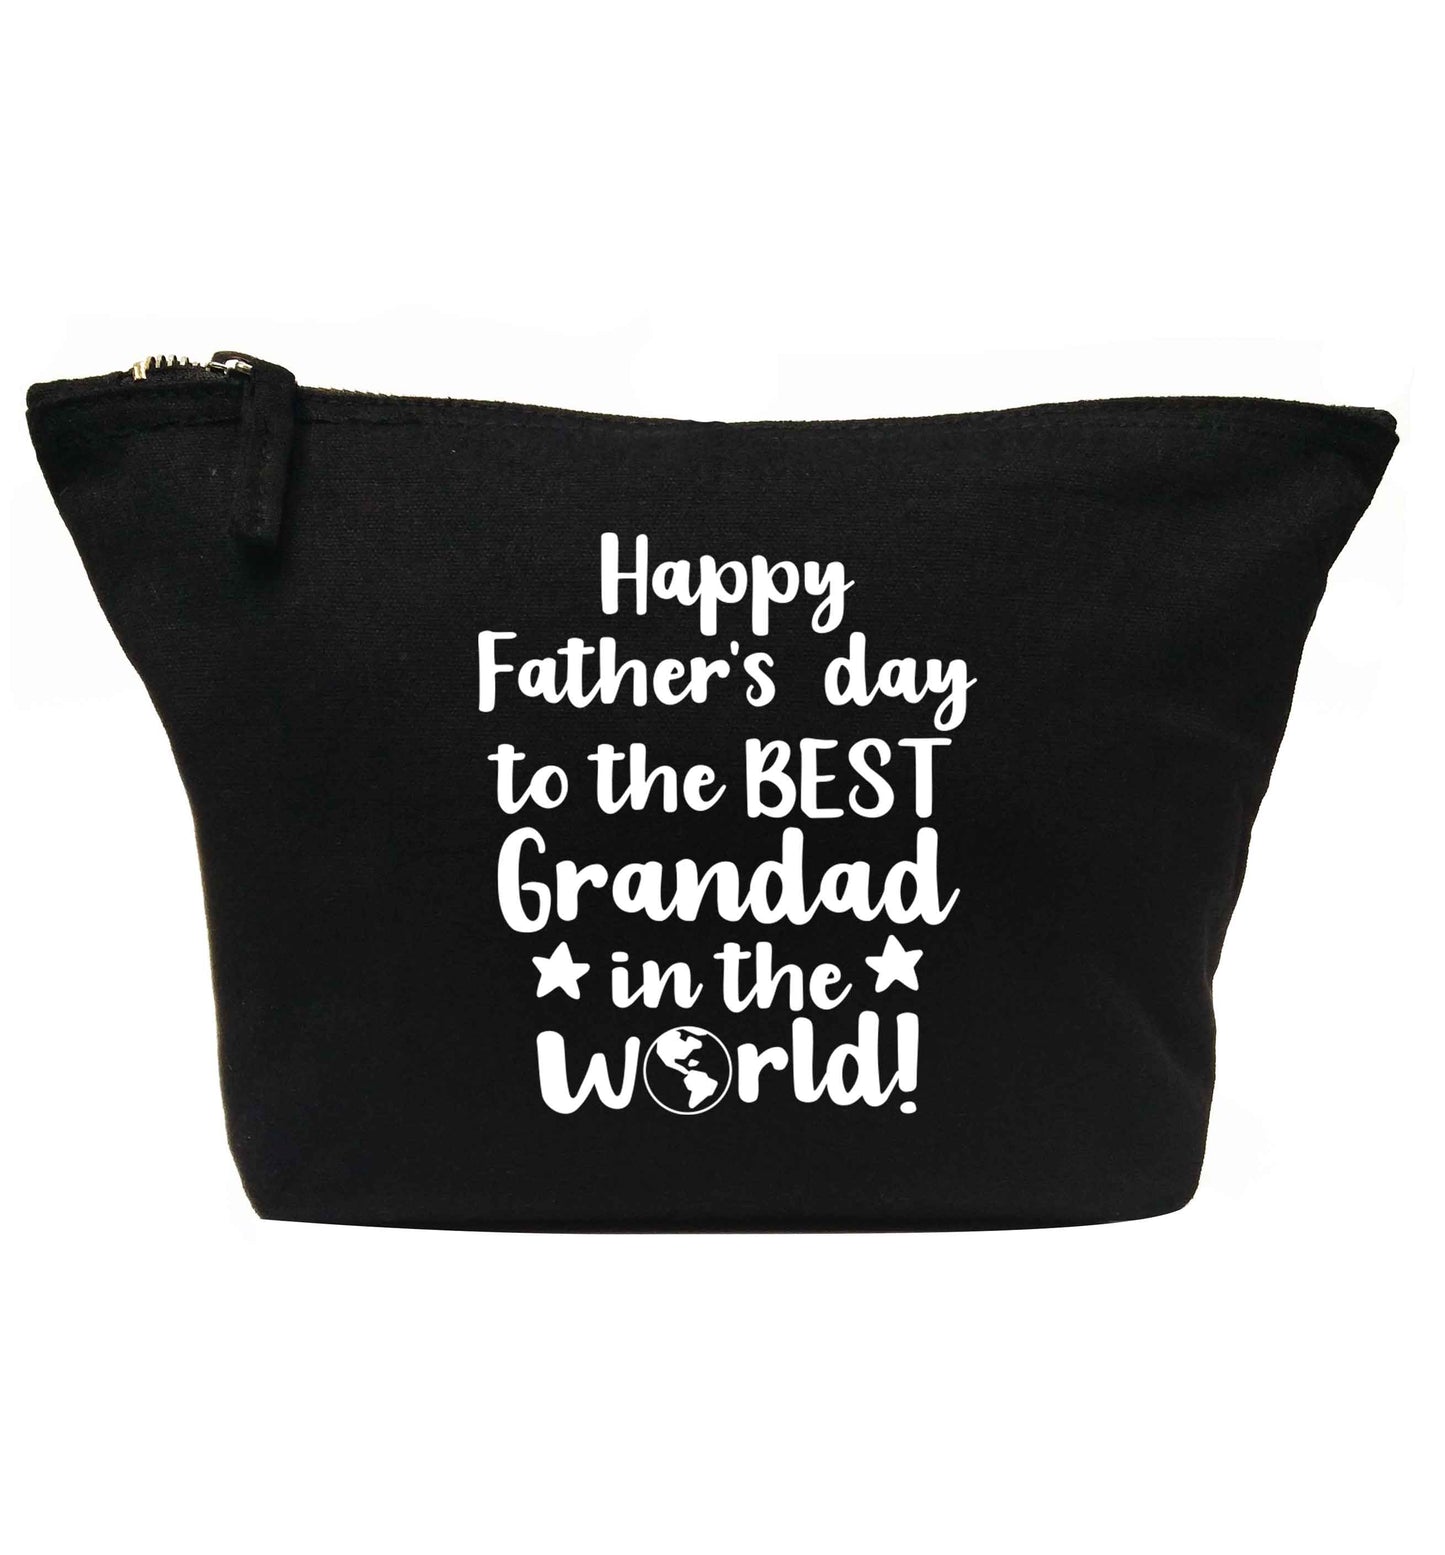 Happy Father's day to the best grandad in the world | Makeup / wash bag